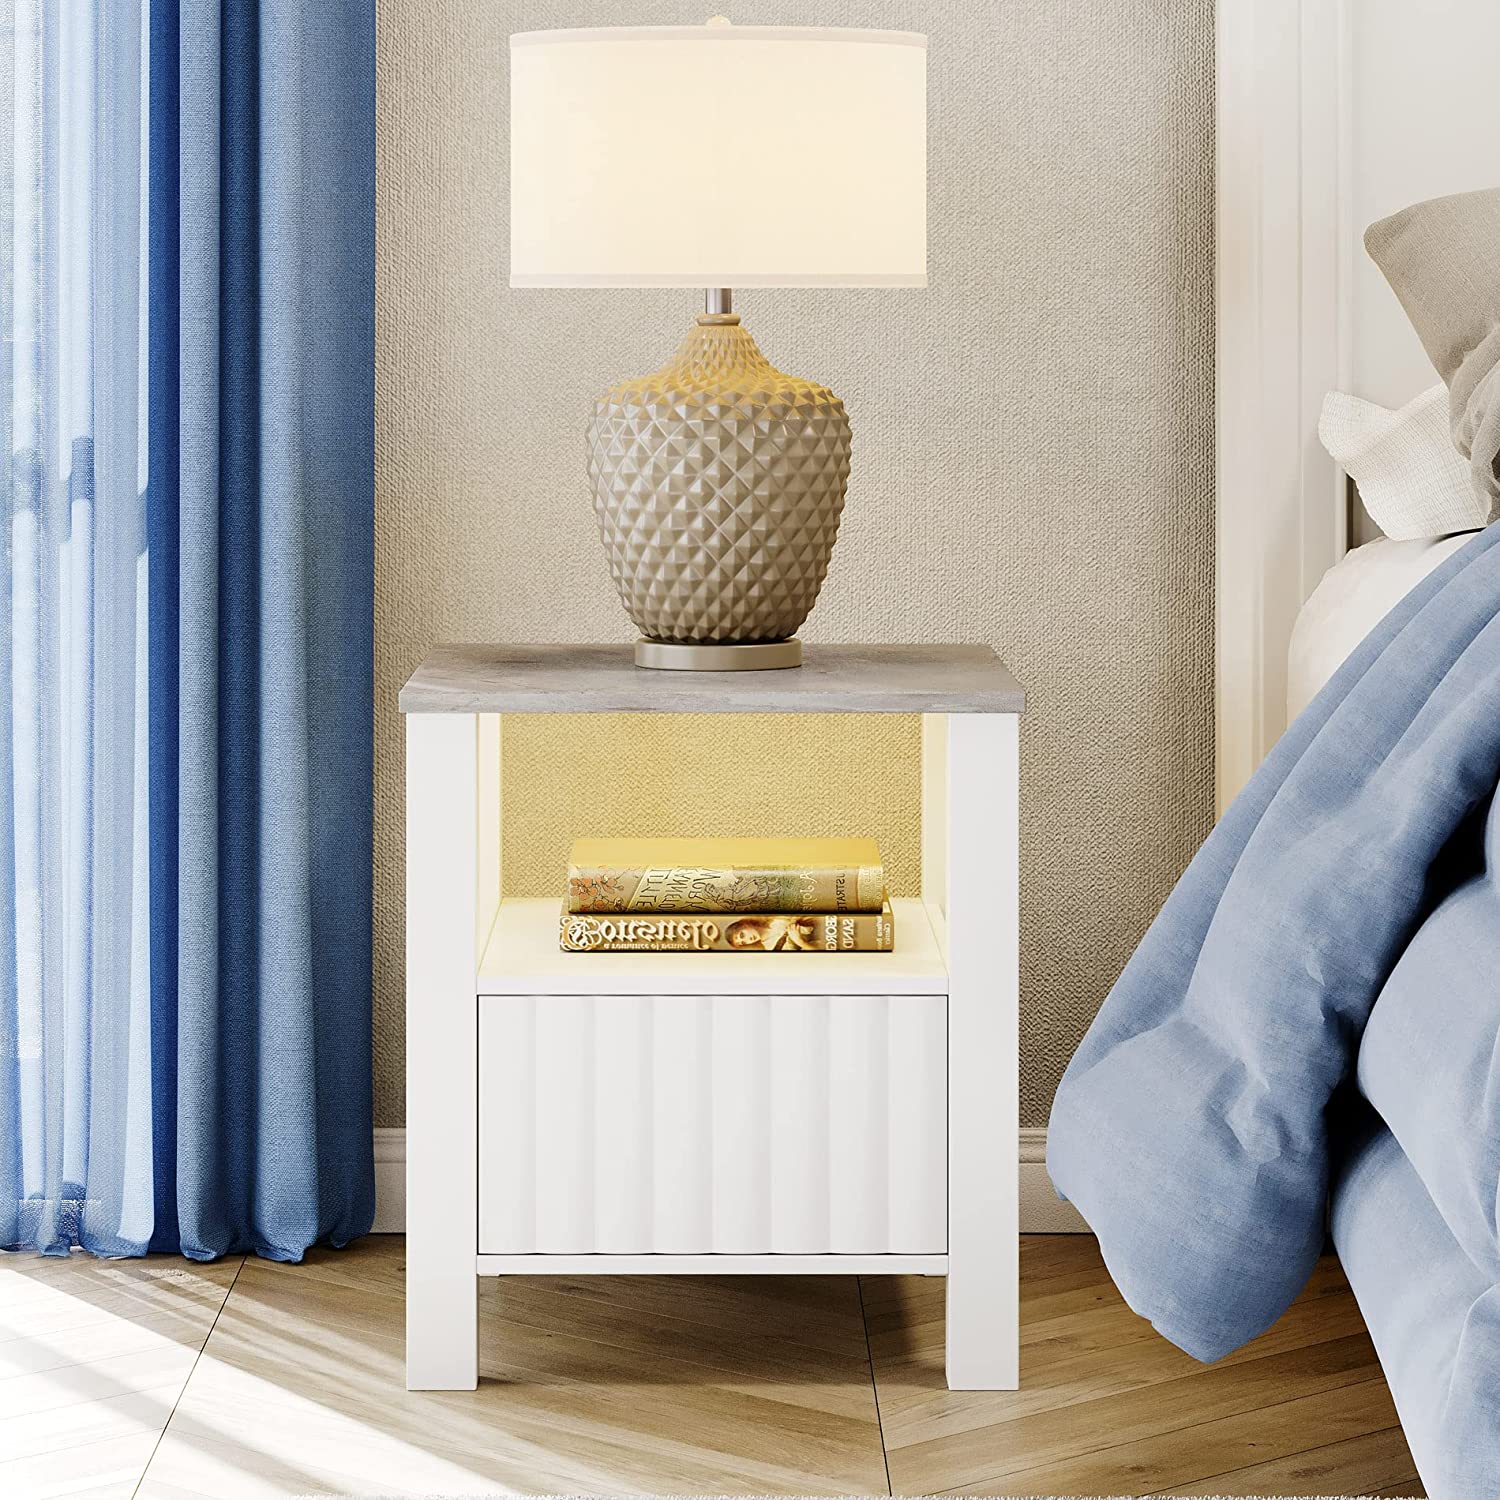 WAMPAT 17.6 White End Tables Wood Modern Night Stand Bedside Tables w